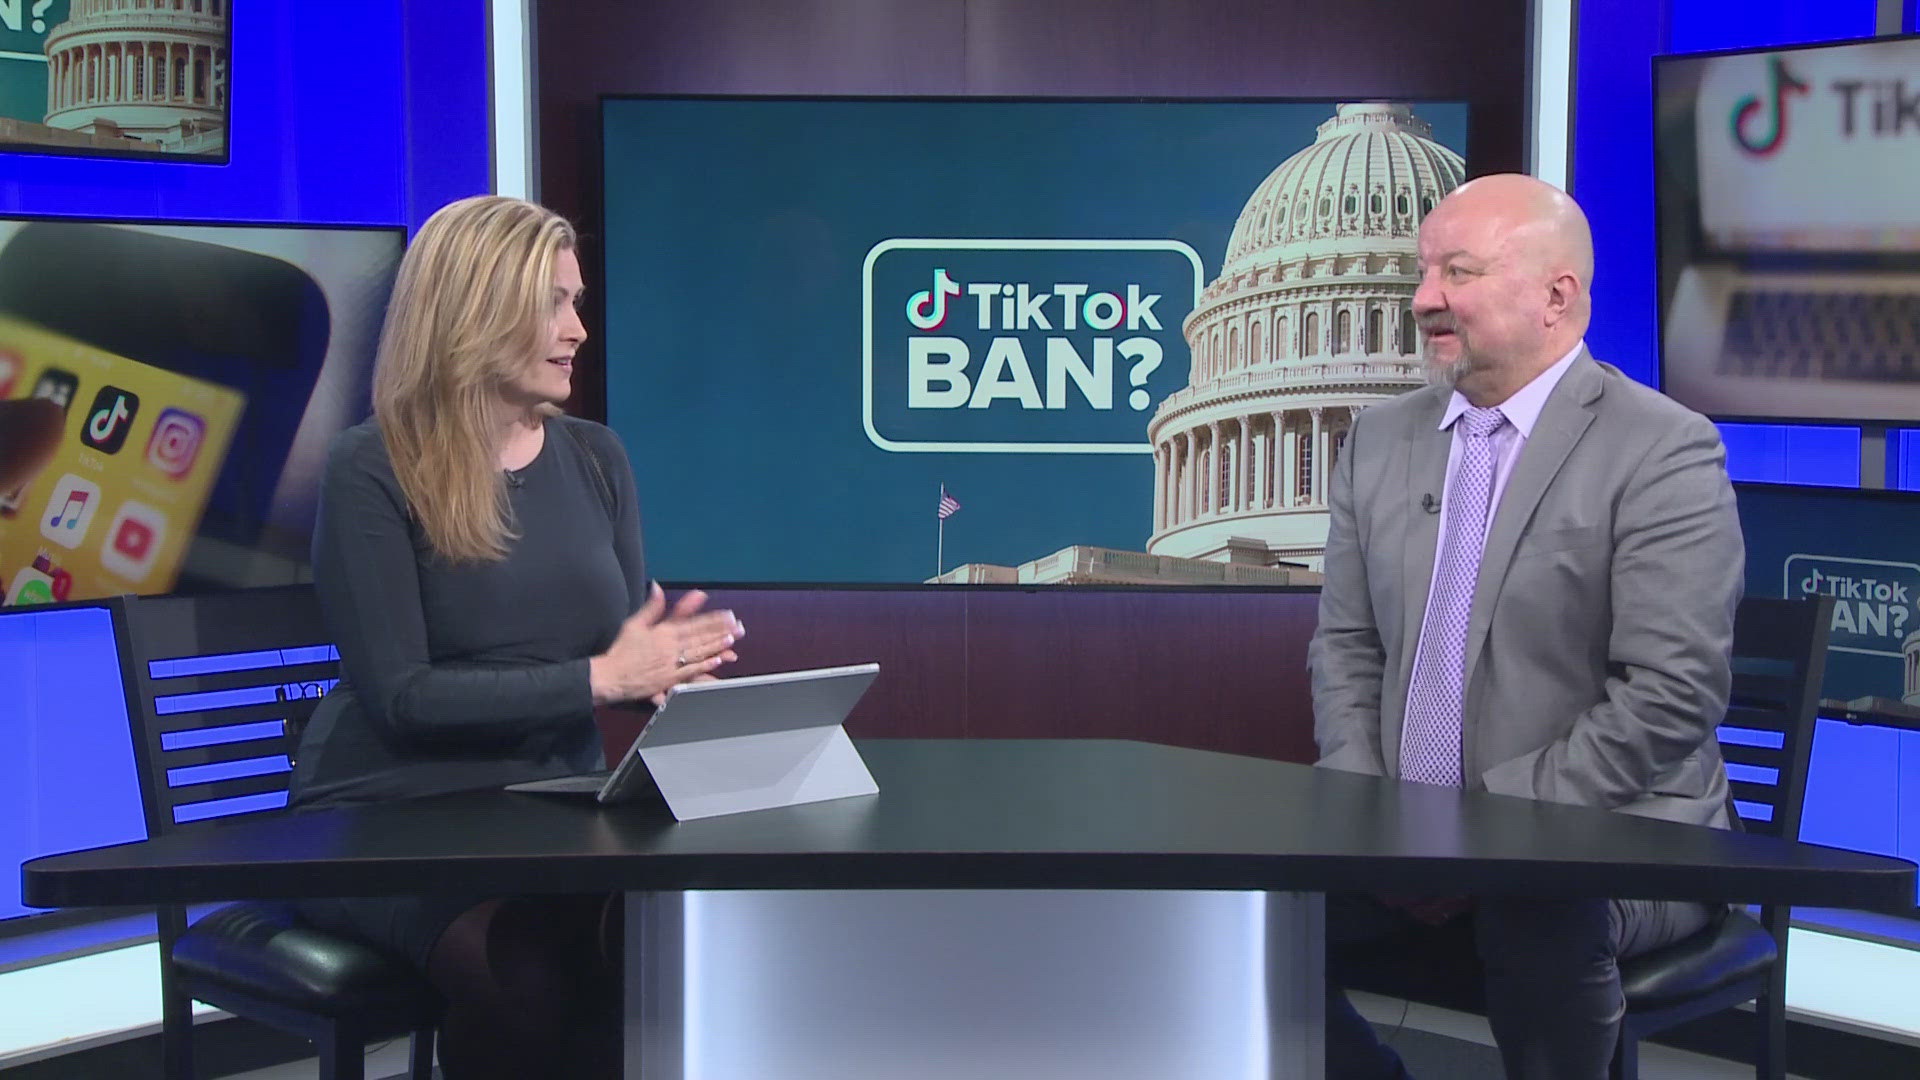 Joining me live in studio is legal analyst Barry Covert to discuss what this means for tik tok.